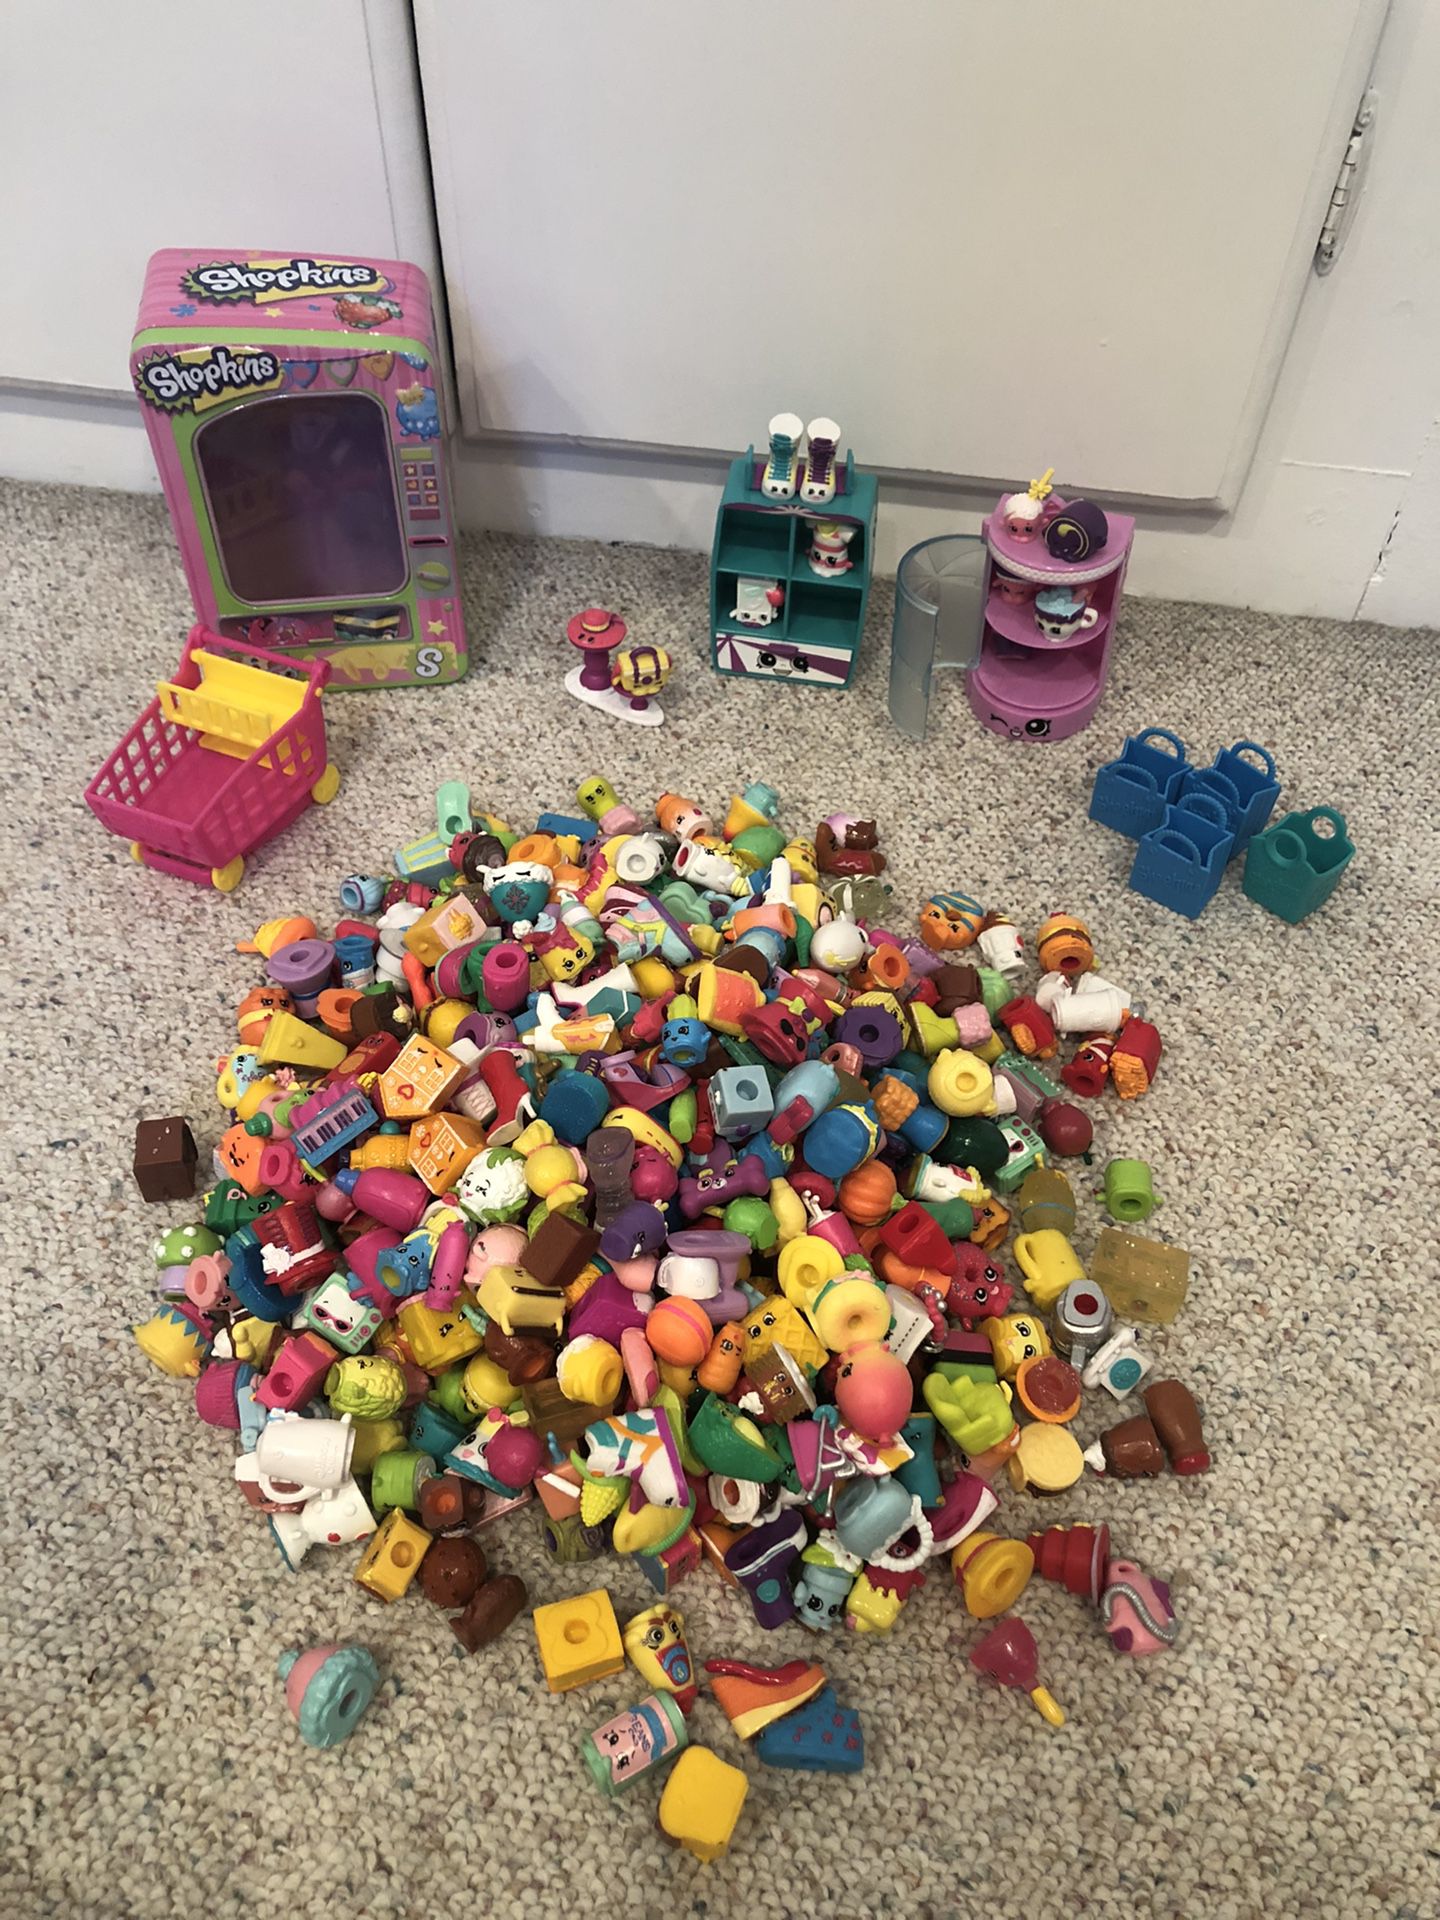 Huge collection of Shopkins and accessories